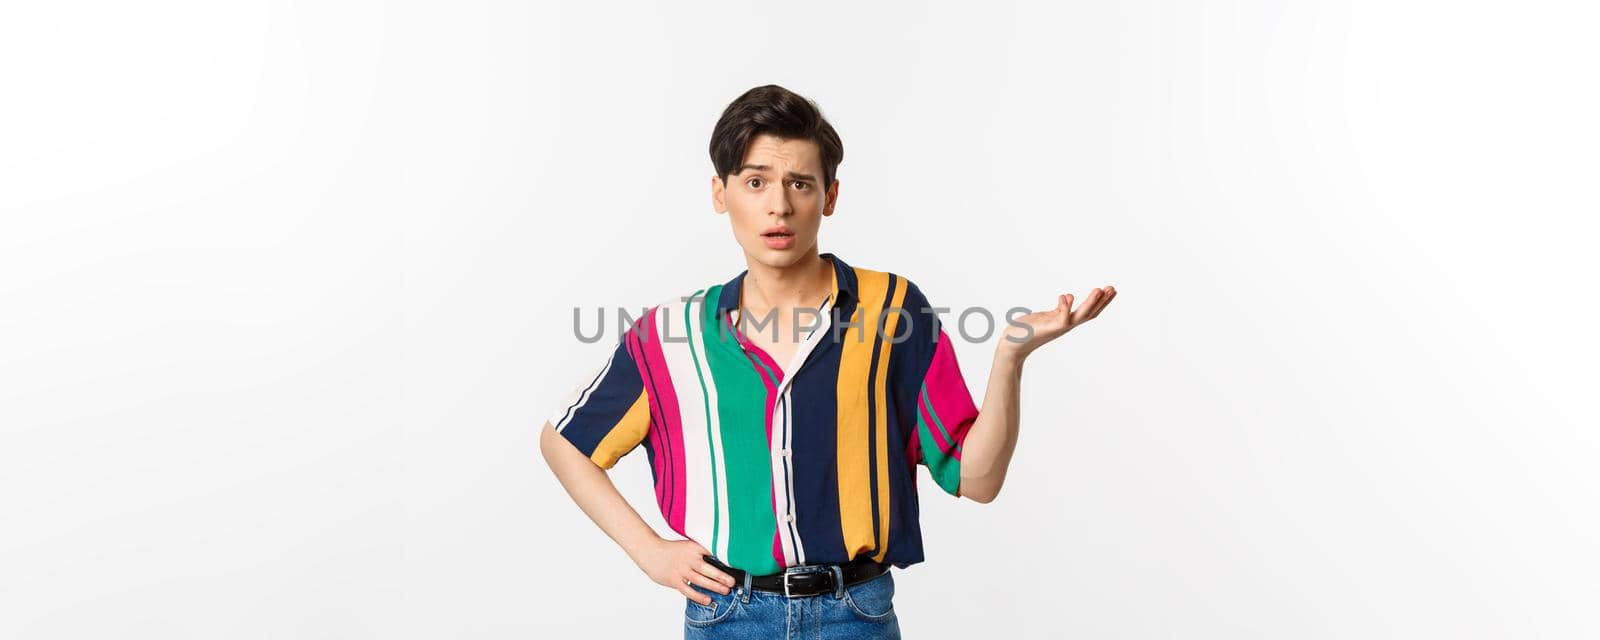 Confused gay man asking what happened, raising hand aside and looking puzzled at camera, standing over white background.